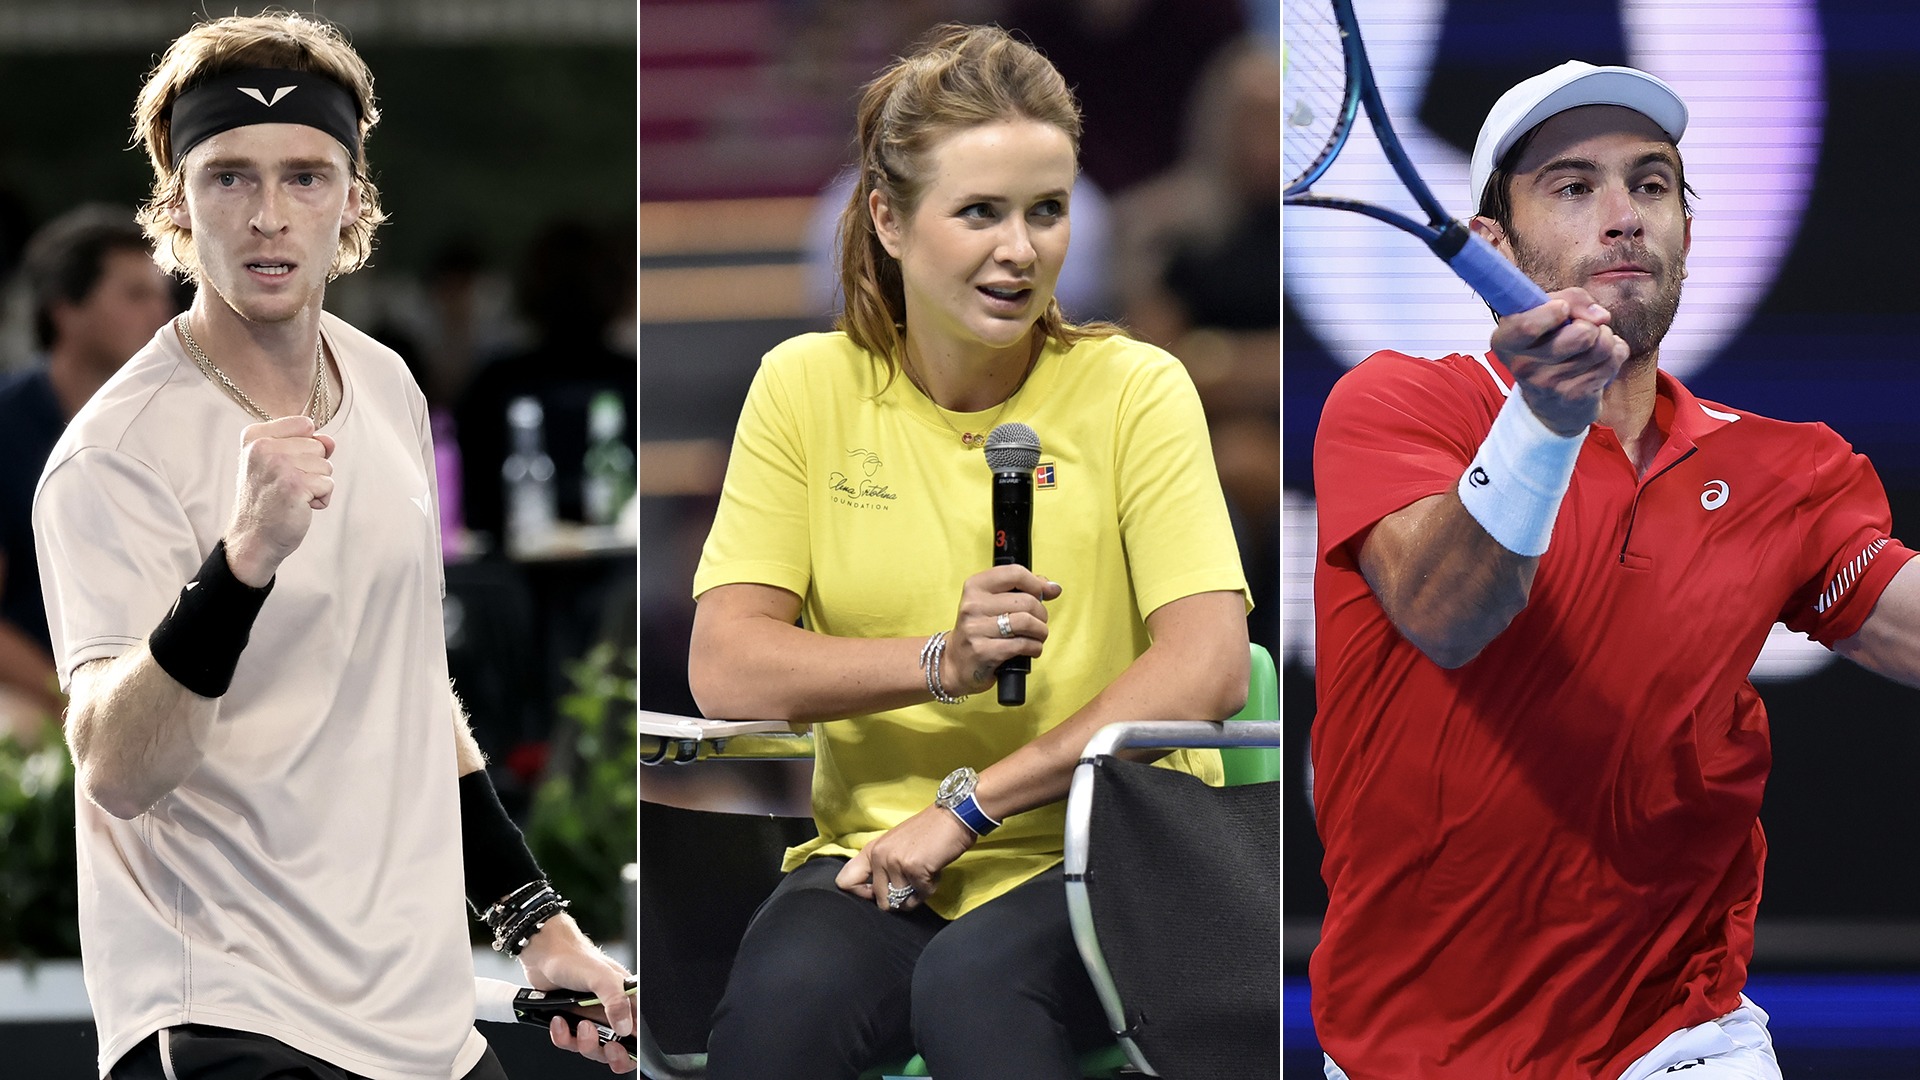 Jabeur to Evolve, Rublev and Svitolina to Kosmos The behind-the-scenes shuffles making headlines before AO